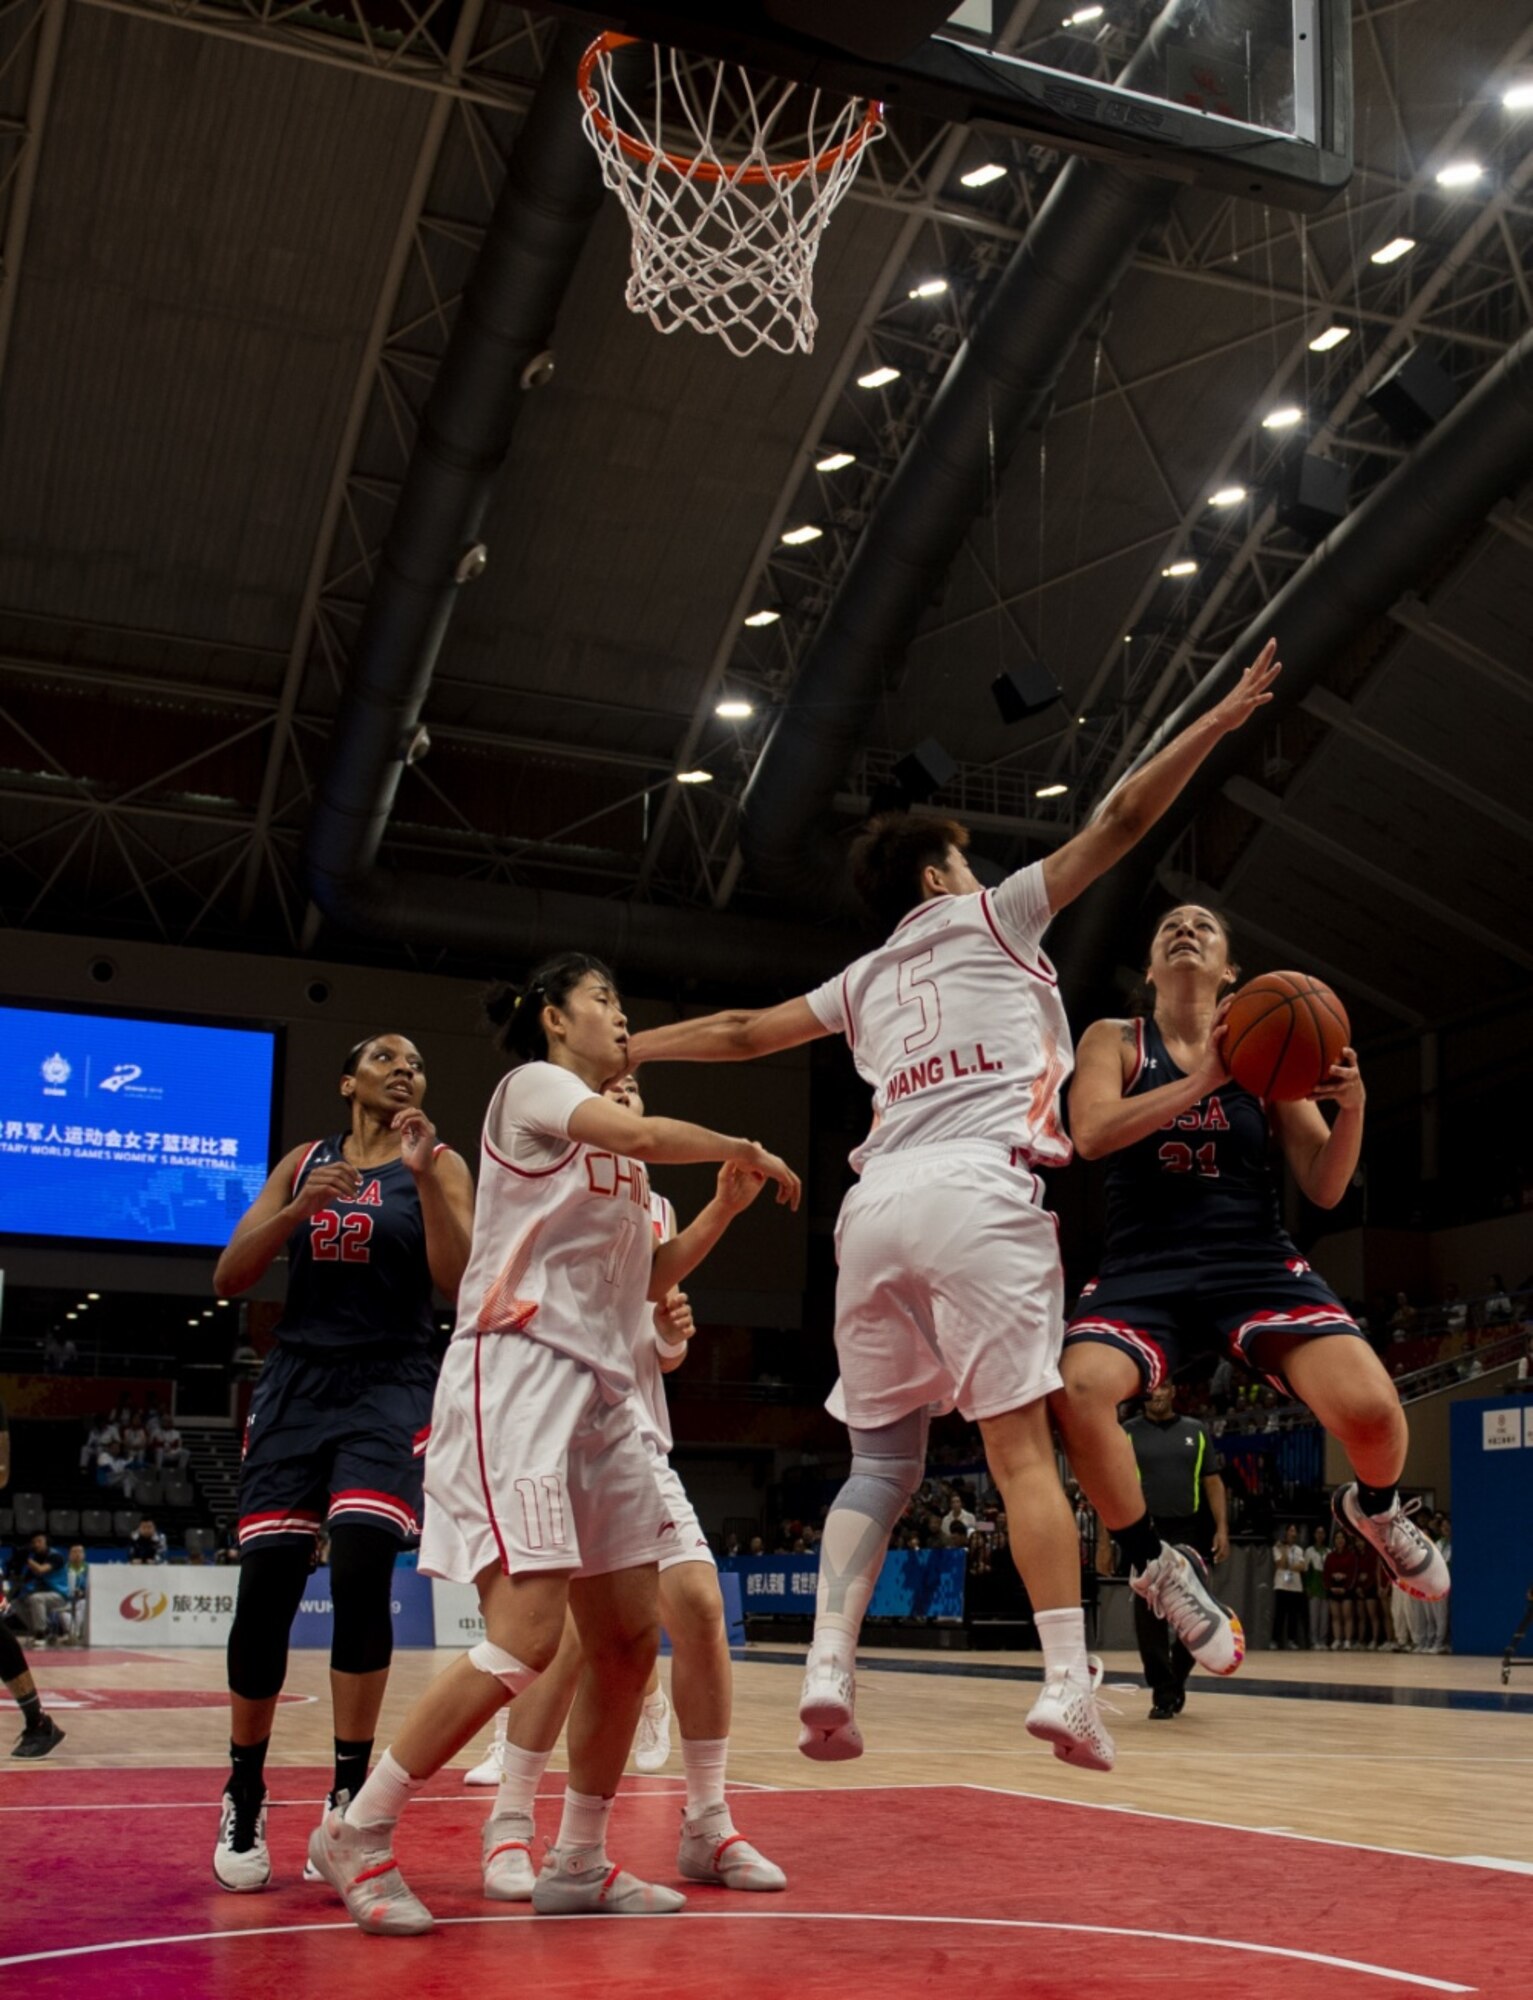 U.S. Air Force Reserve Citizen Airman Senior Airman Santia Jackson, United States Armed Forces Military World Games Women’s Basketball player, positions herself for a rebound as teammate Staff Sgt. Cinnamon Kava, drives past a Chinese defender for a layup during the Conseil International du Sport Militaire Women’s Basketball Competition in Wuhan China, Oct. 22, 2019. The 7th MWG will feature military athletes from around the world with an estimated participation of more than 100 nations and more than 10,000 participants. (U.S. Air Force photo by Staff Sergeant James R. Crow)